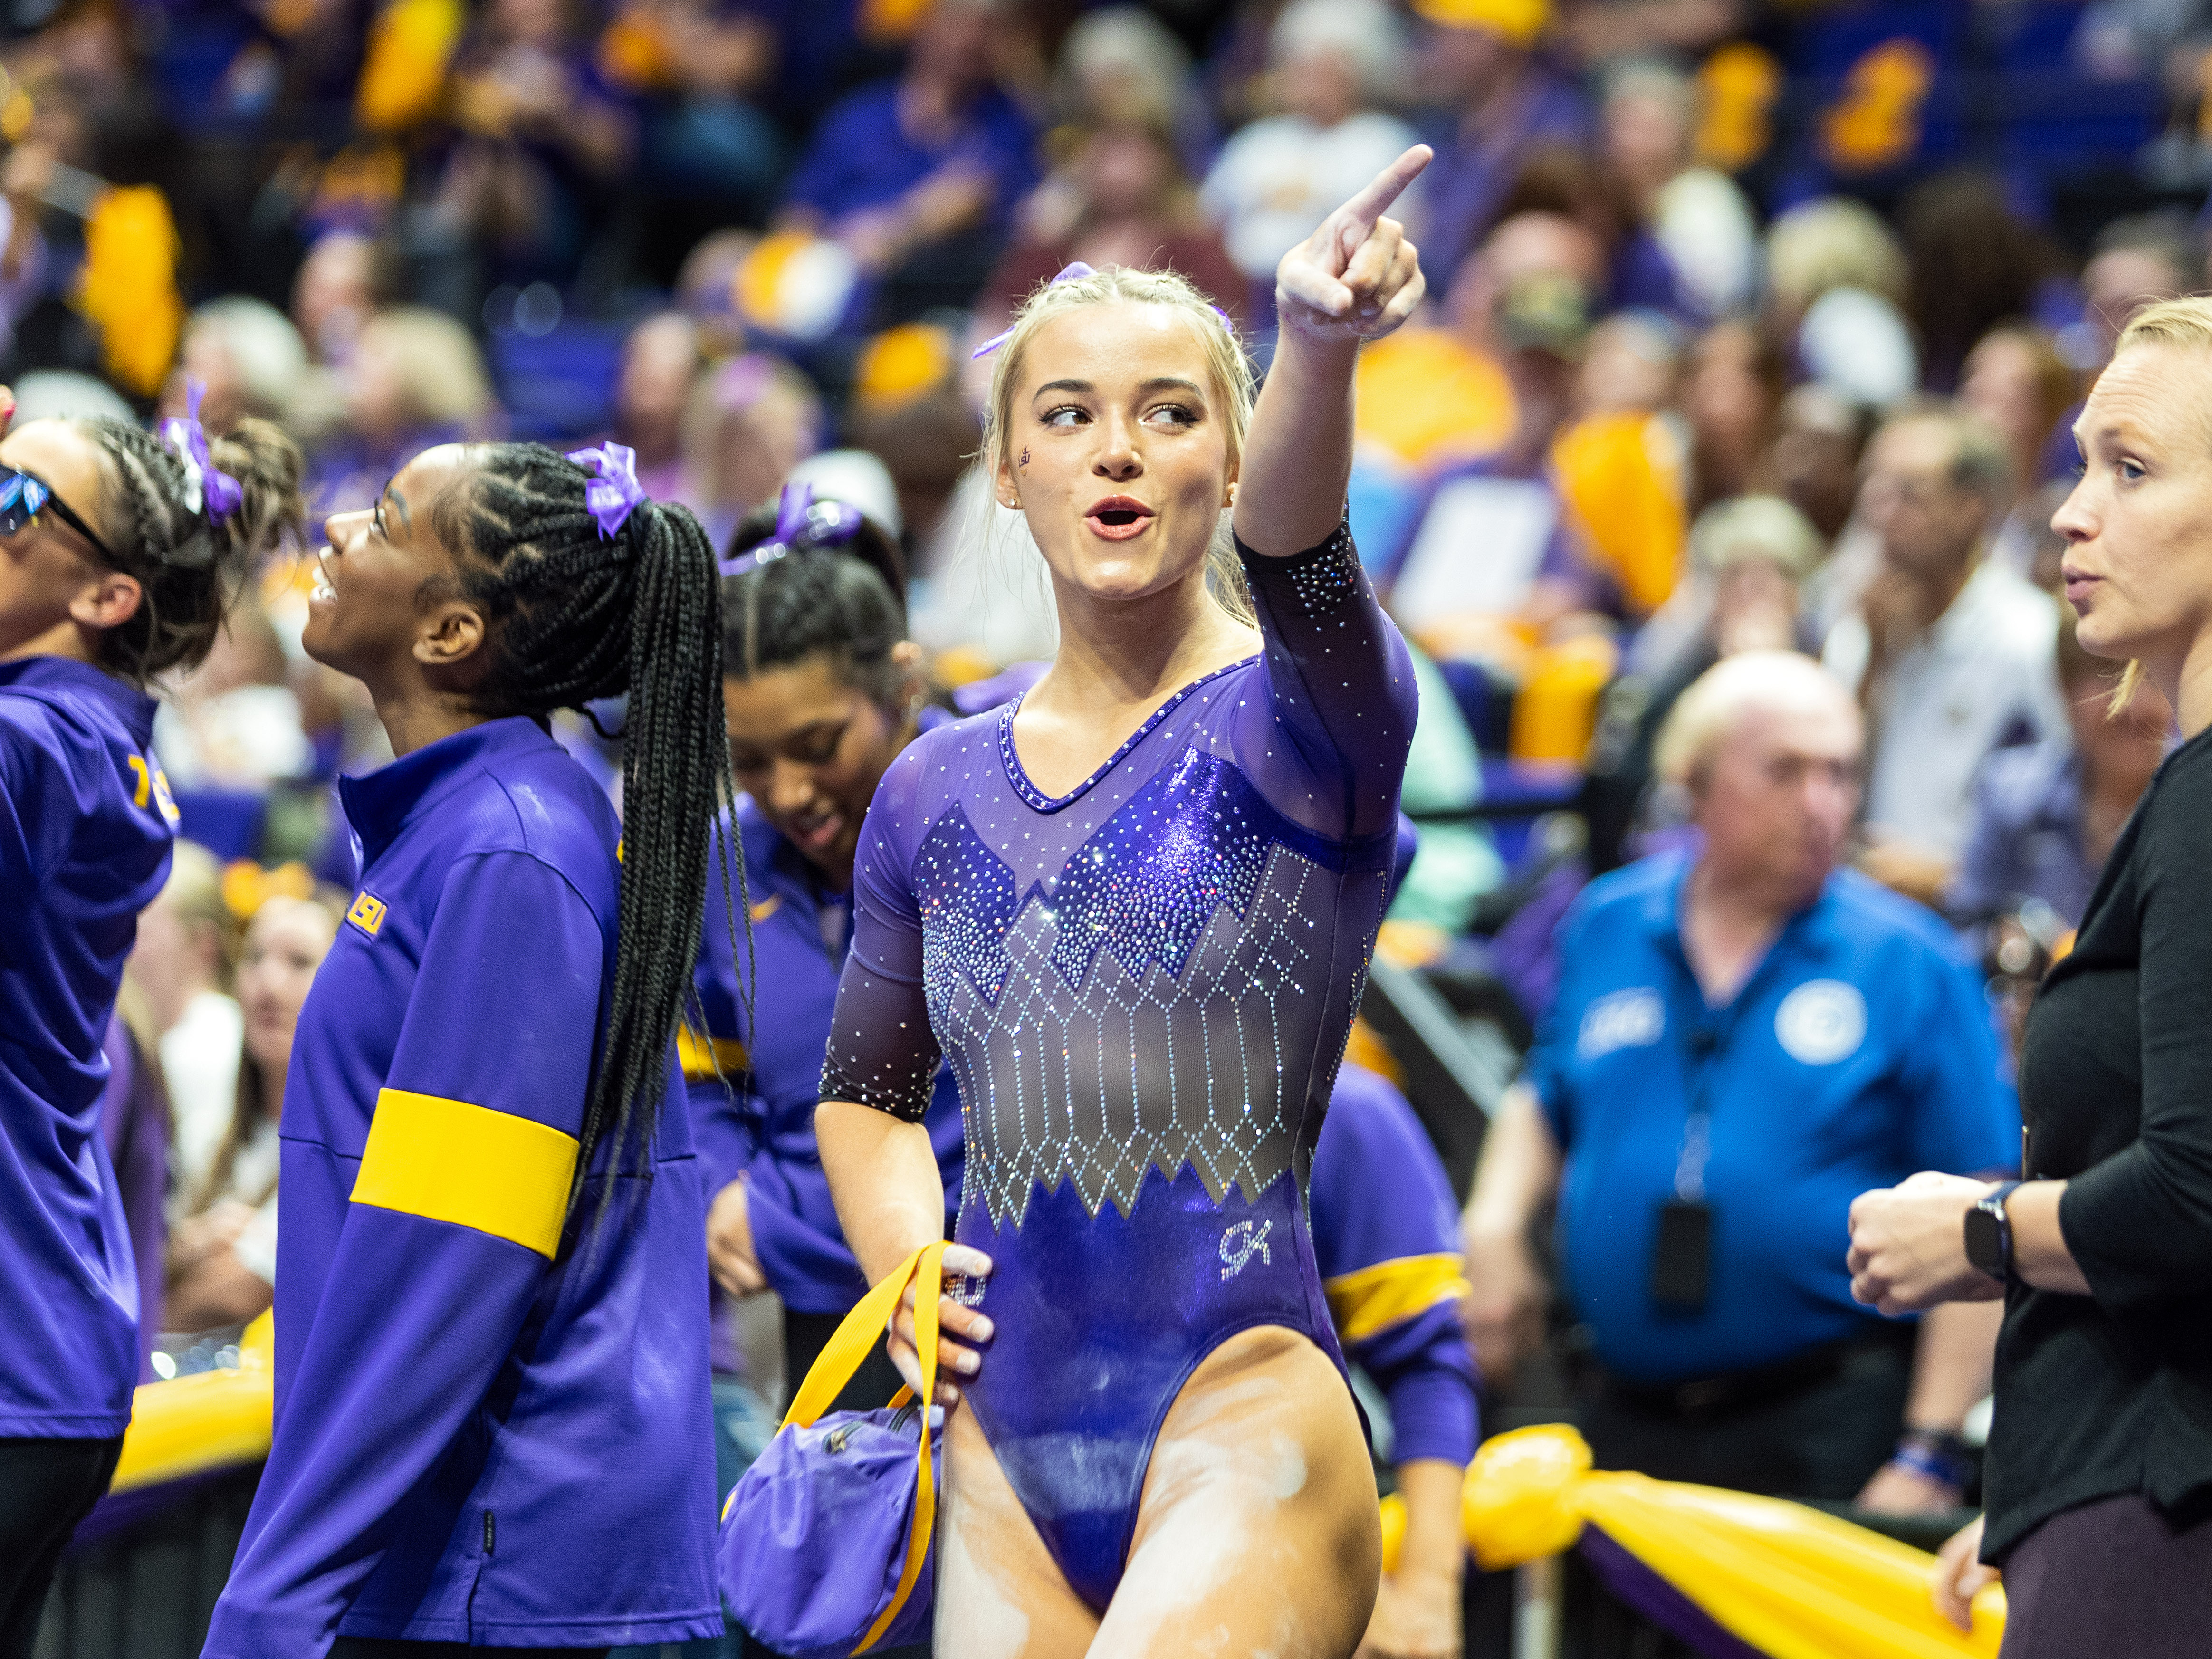 Dunne is heading into her senior year with the LSU Tigers